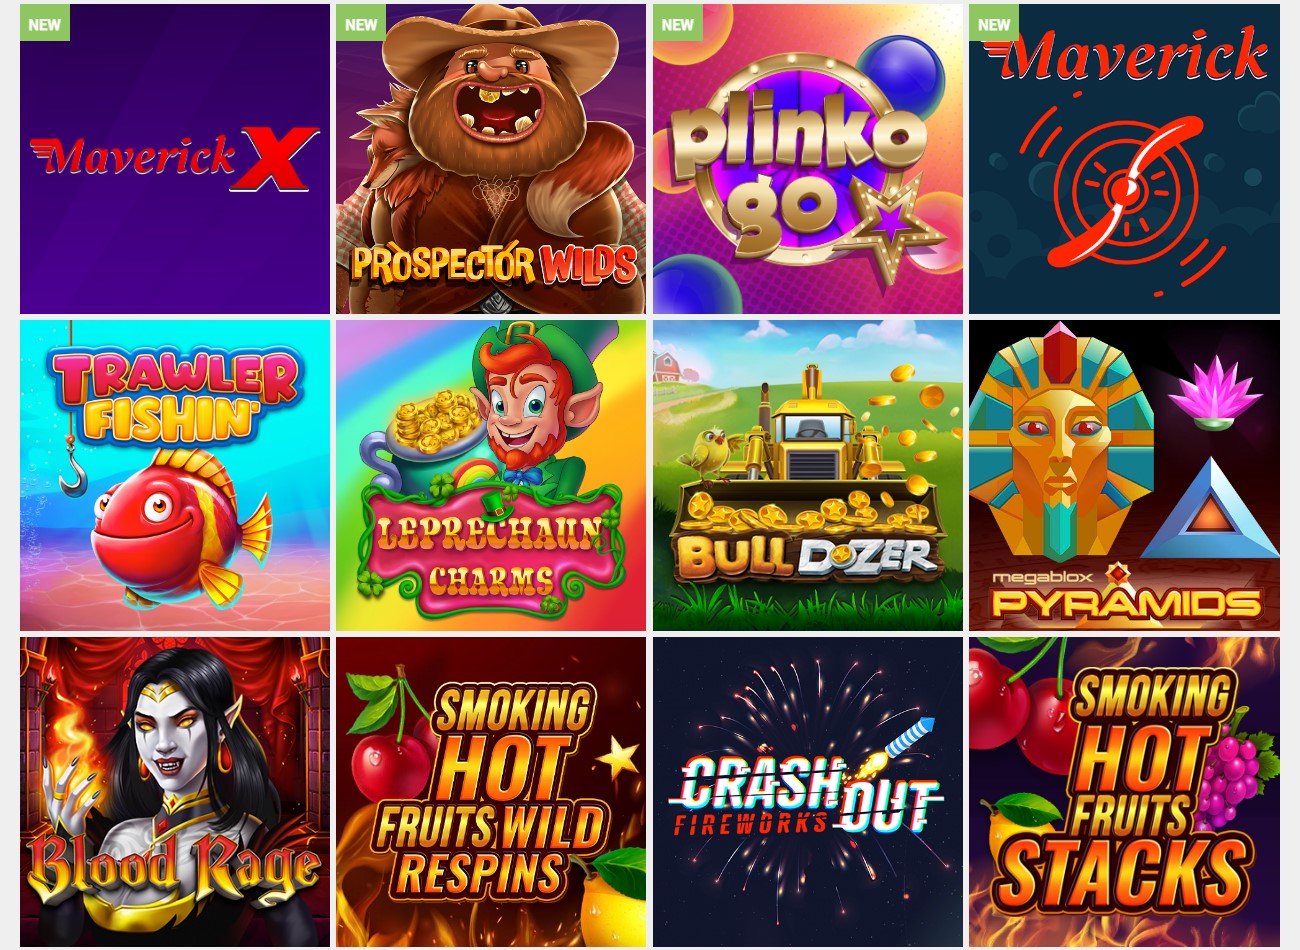 1x2 Gaming Slot Spiele